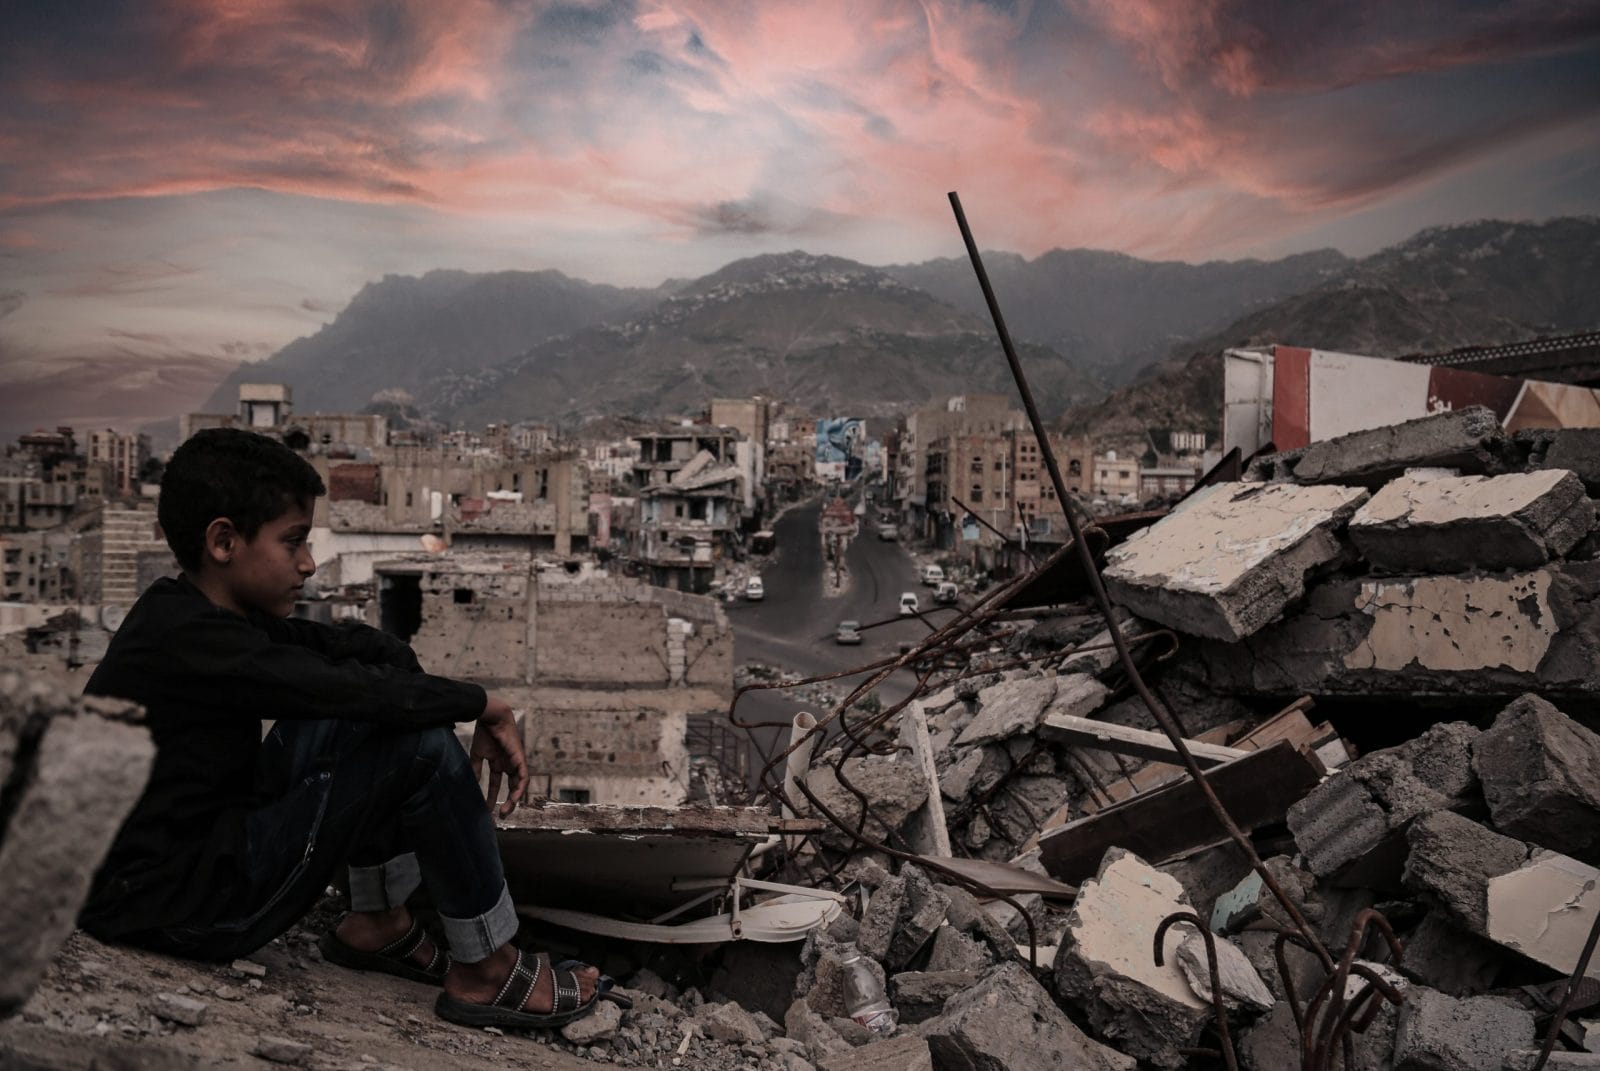 Child in Yemen looking out over destroyed city